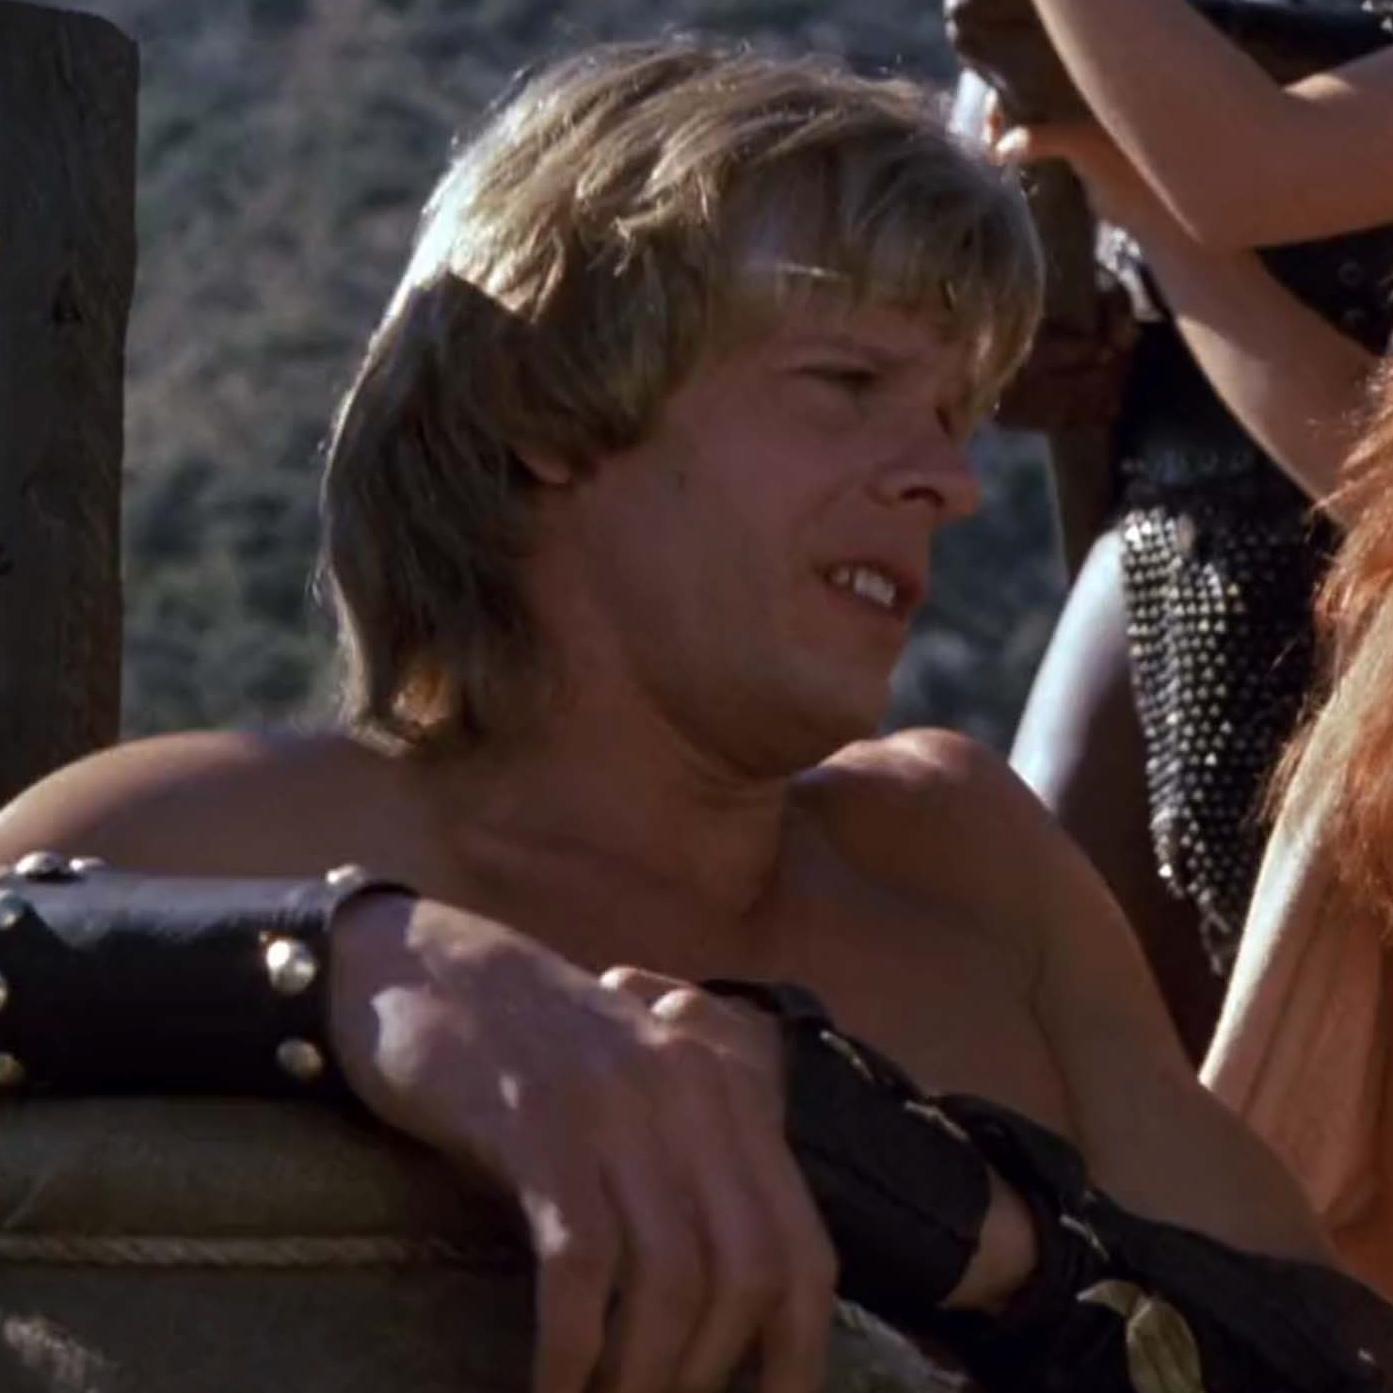 Marc Singer in The Beastmaster